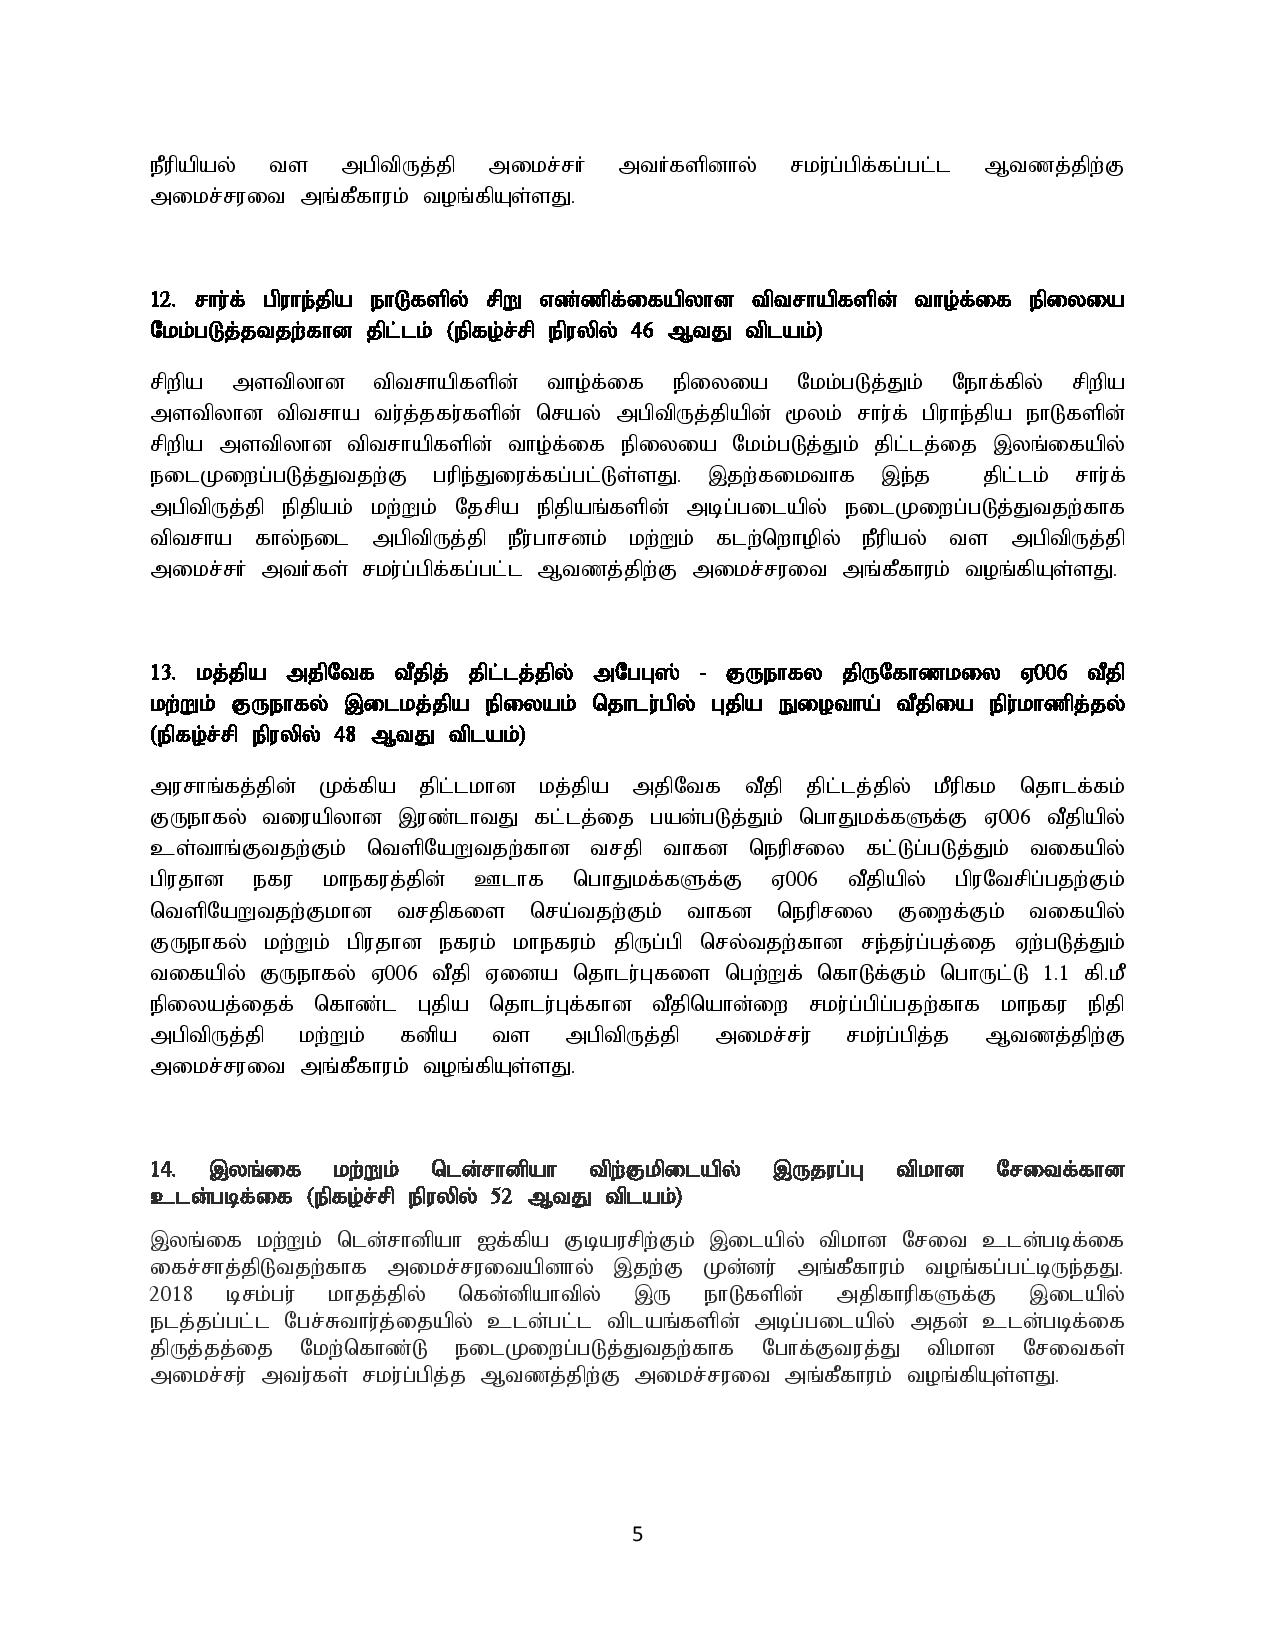 cabinet decision Tamil 19.07.2019 page 005